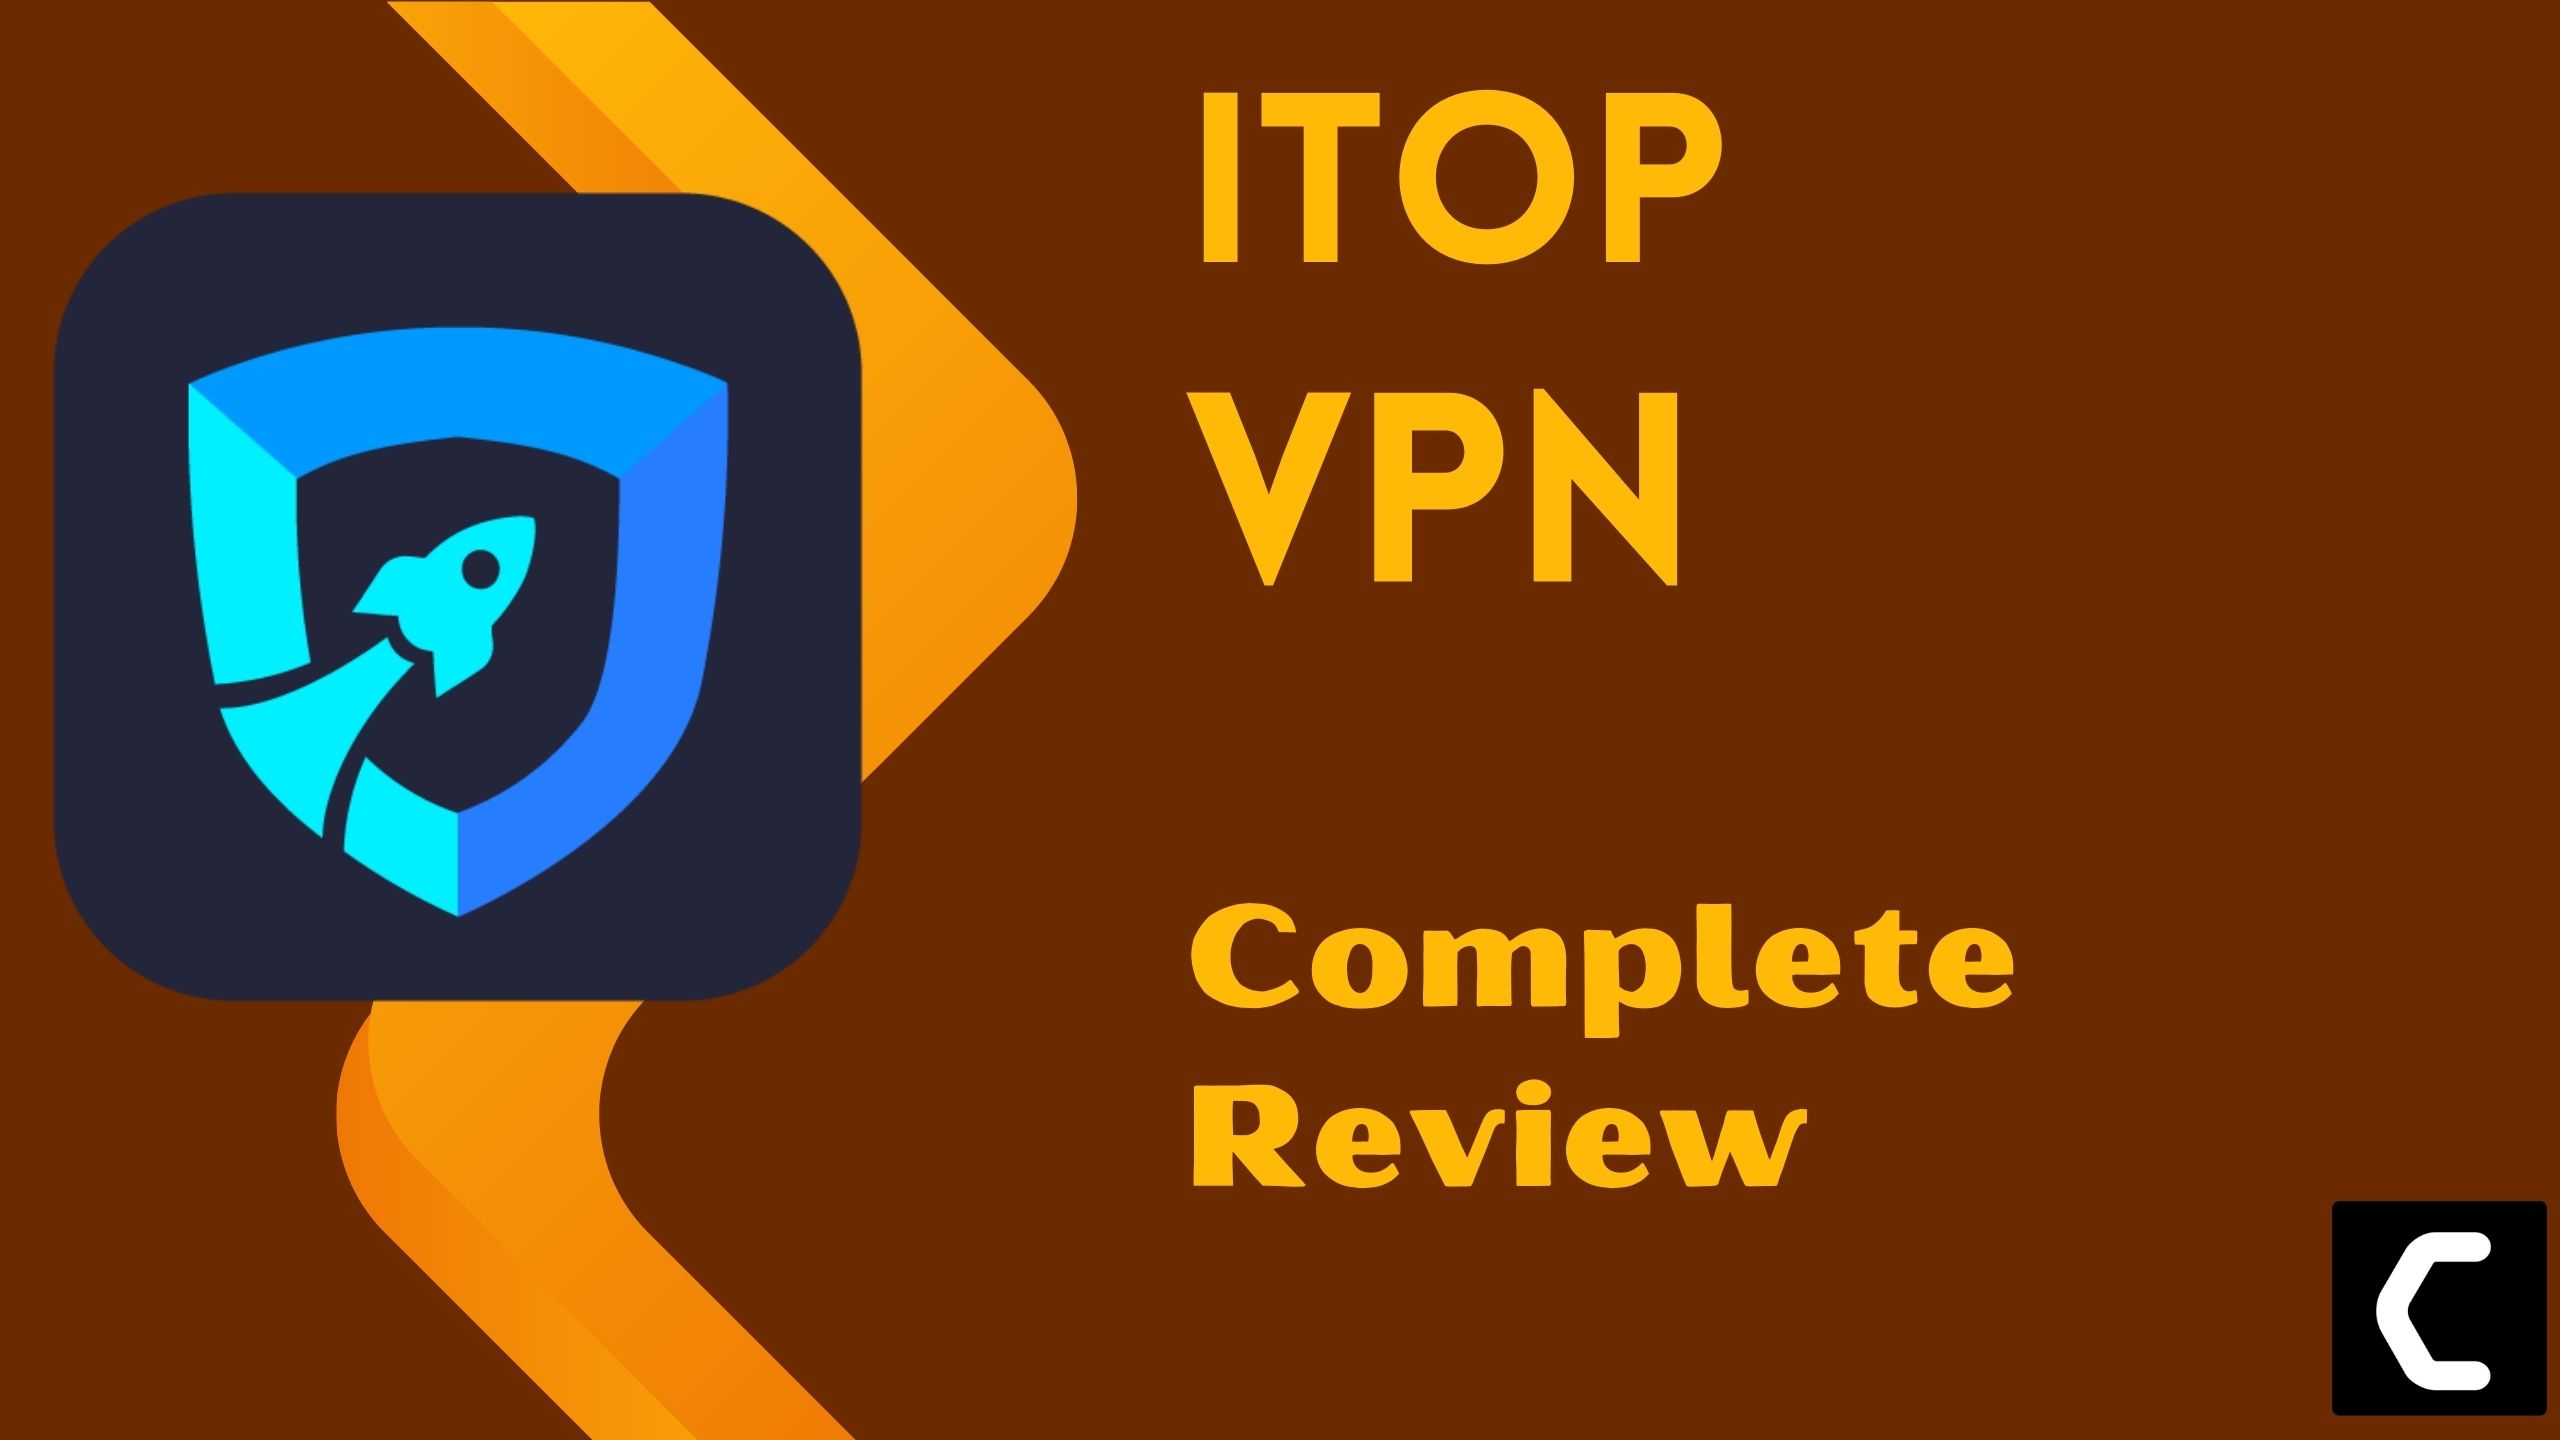 iTOP VPN – Complete Review